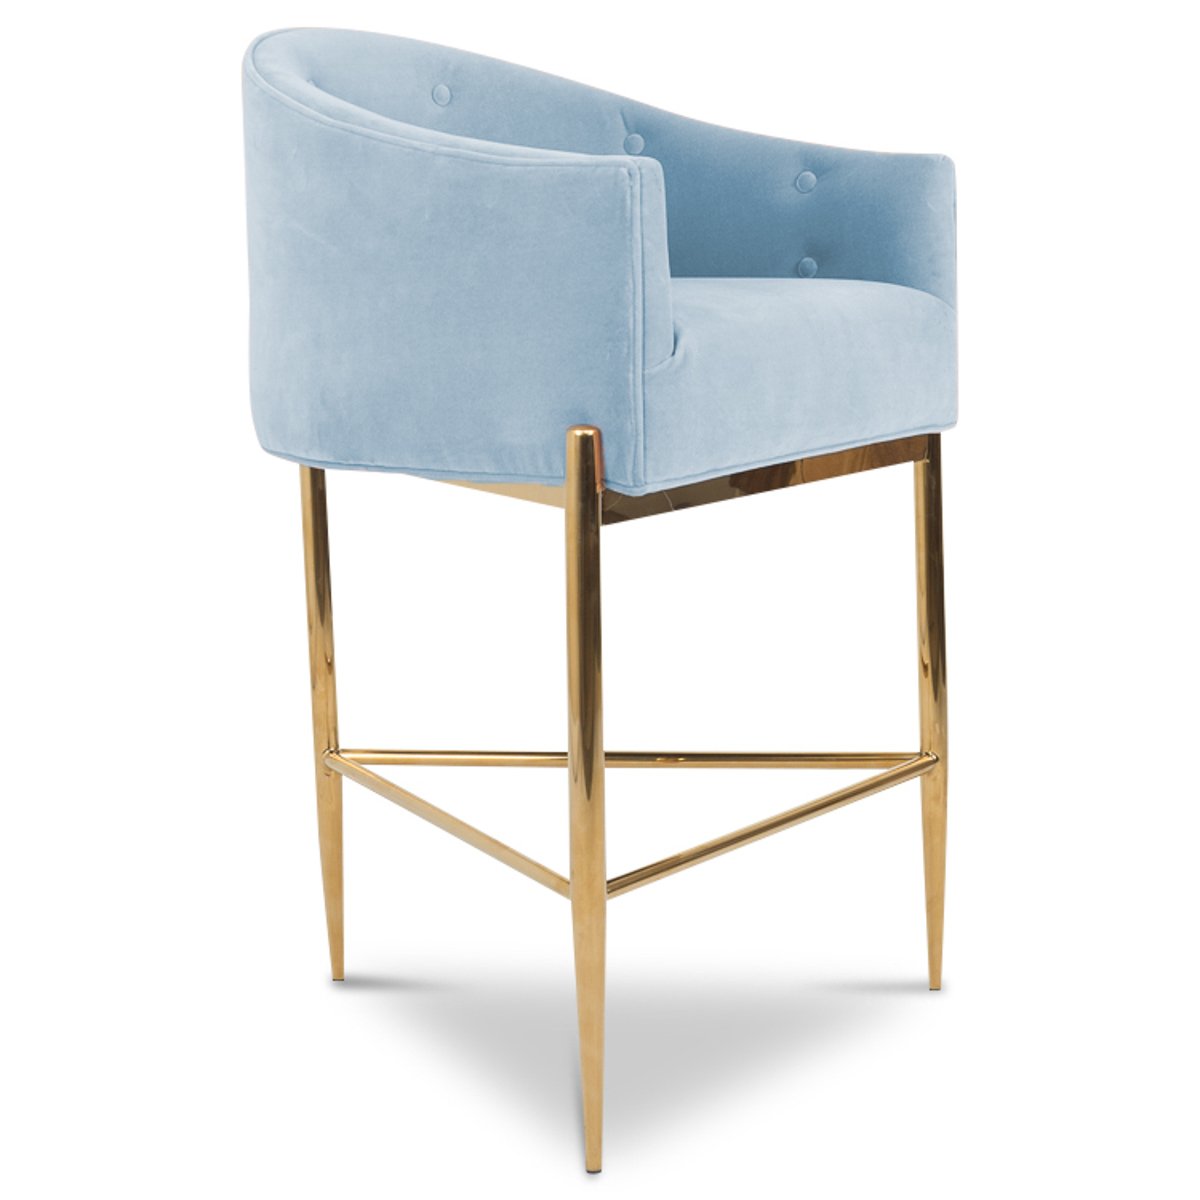 These Modern Bar Chairs Will Get You in the Mood for Valentine's Day